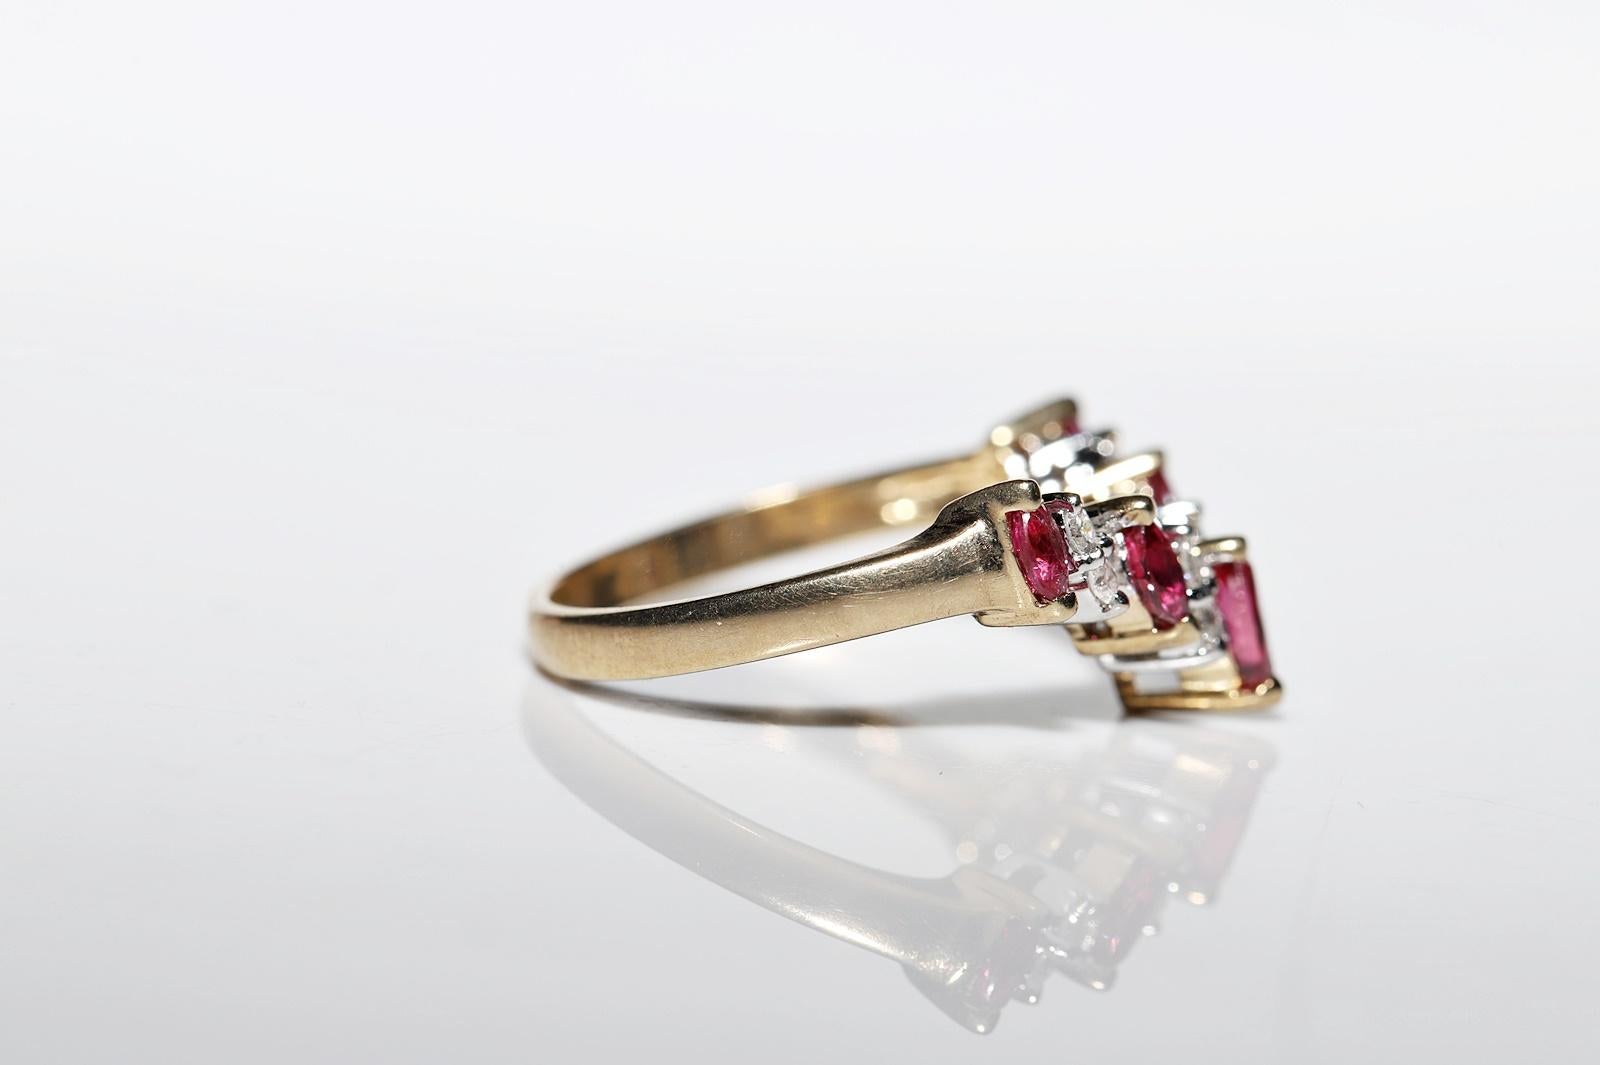  Vintage Circa 1990s 14k Gold Natural Diamond And Ruby Decorated Ring  For Sale 2